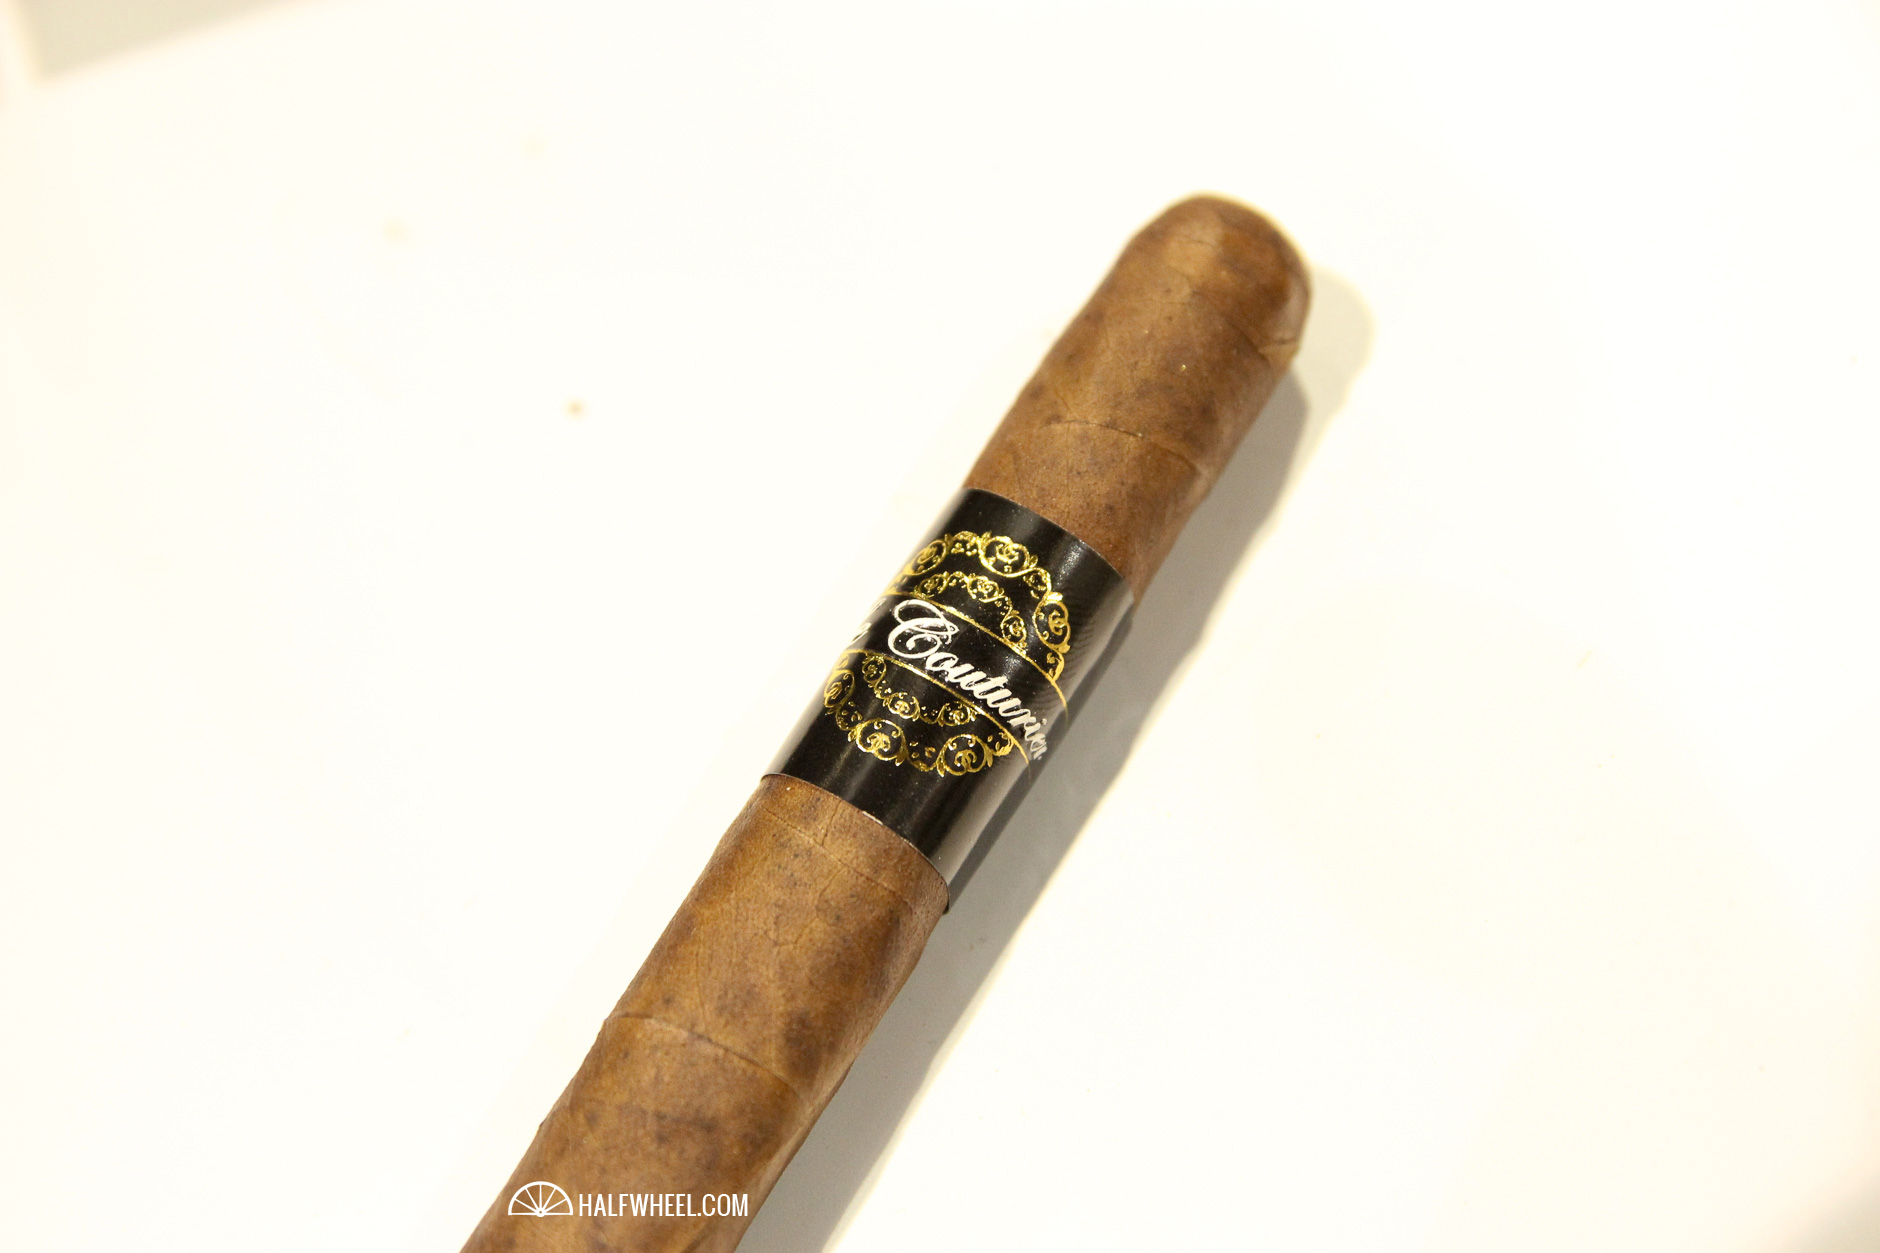 LUJ Cigars Le Couturier IPCPR 2016